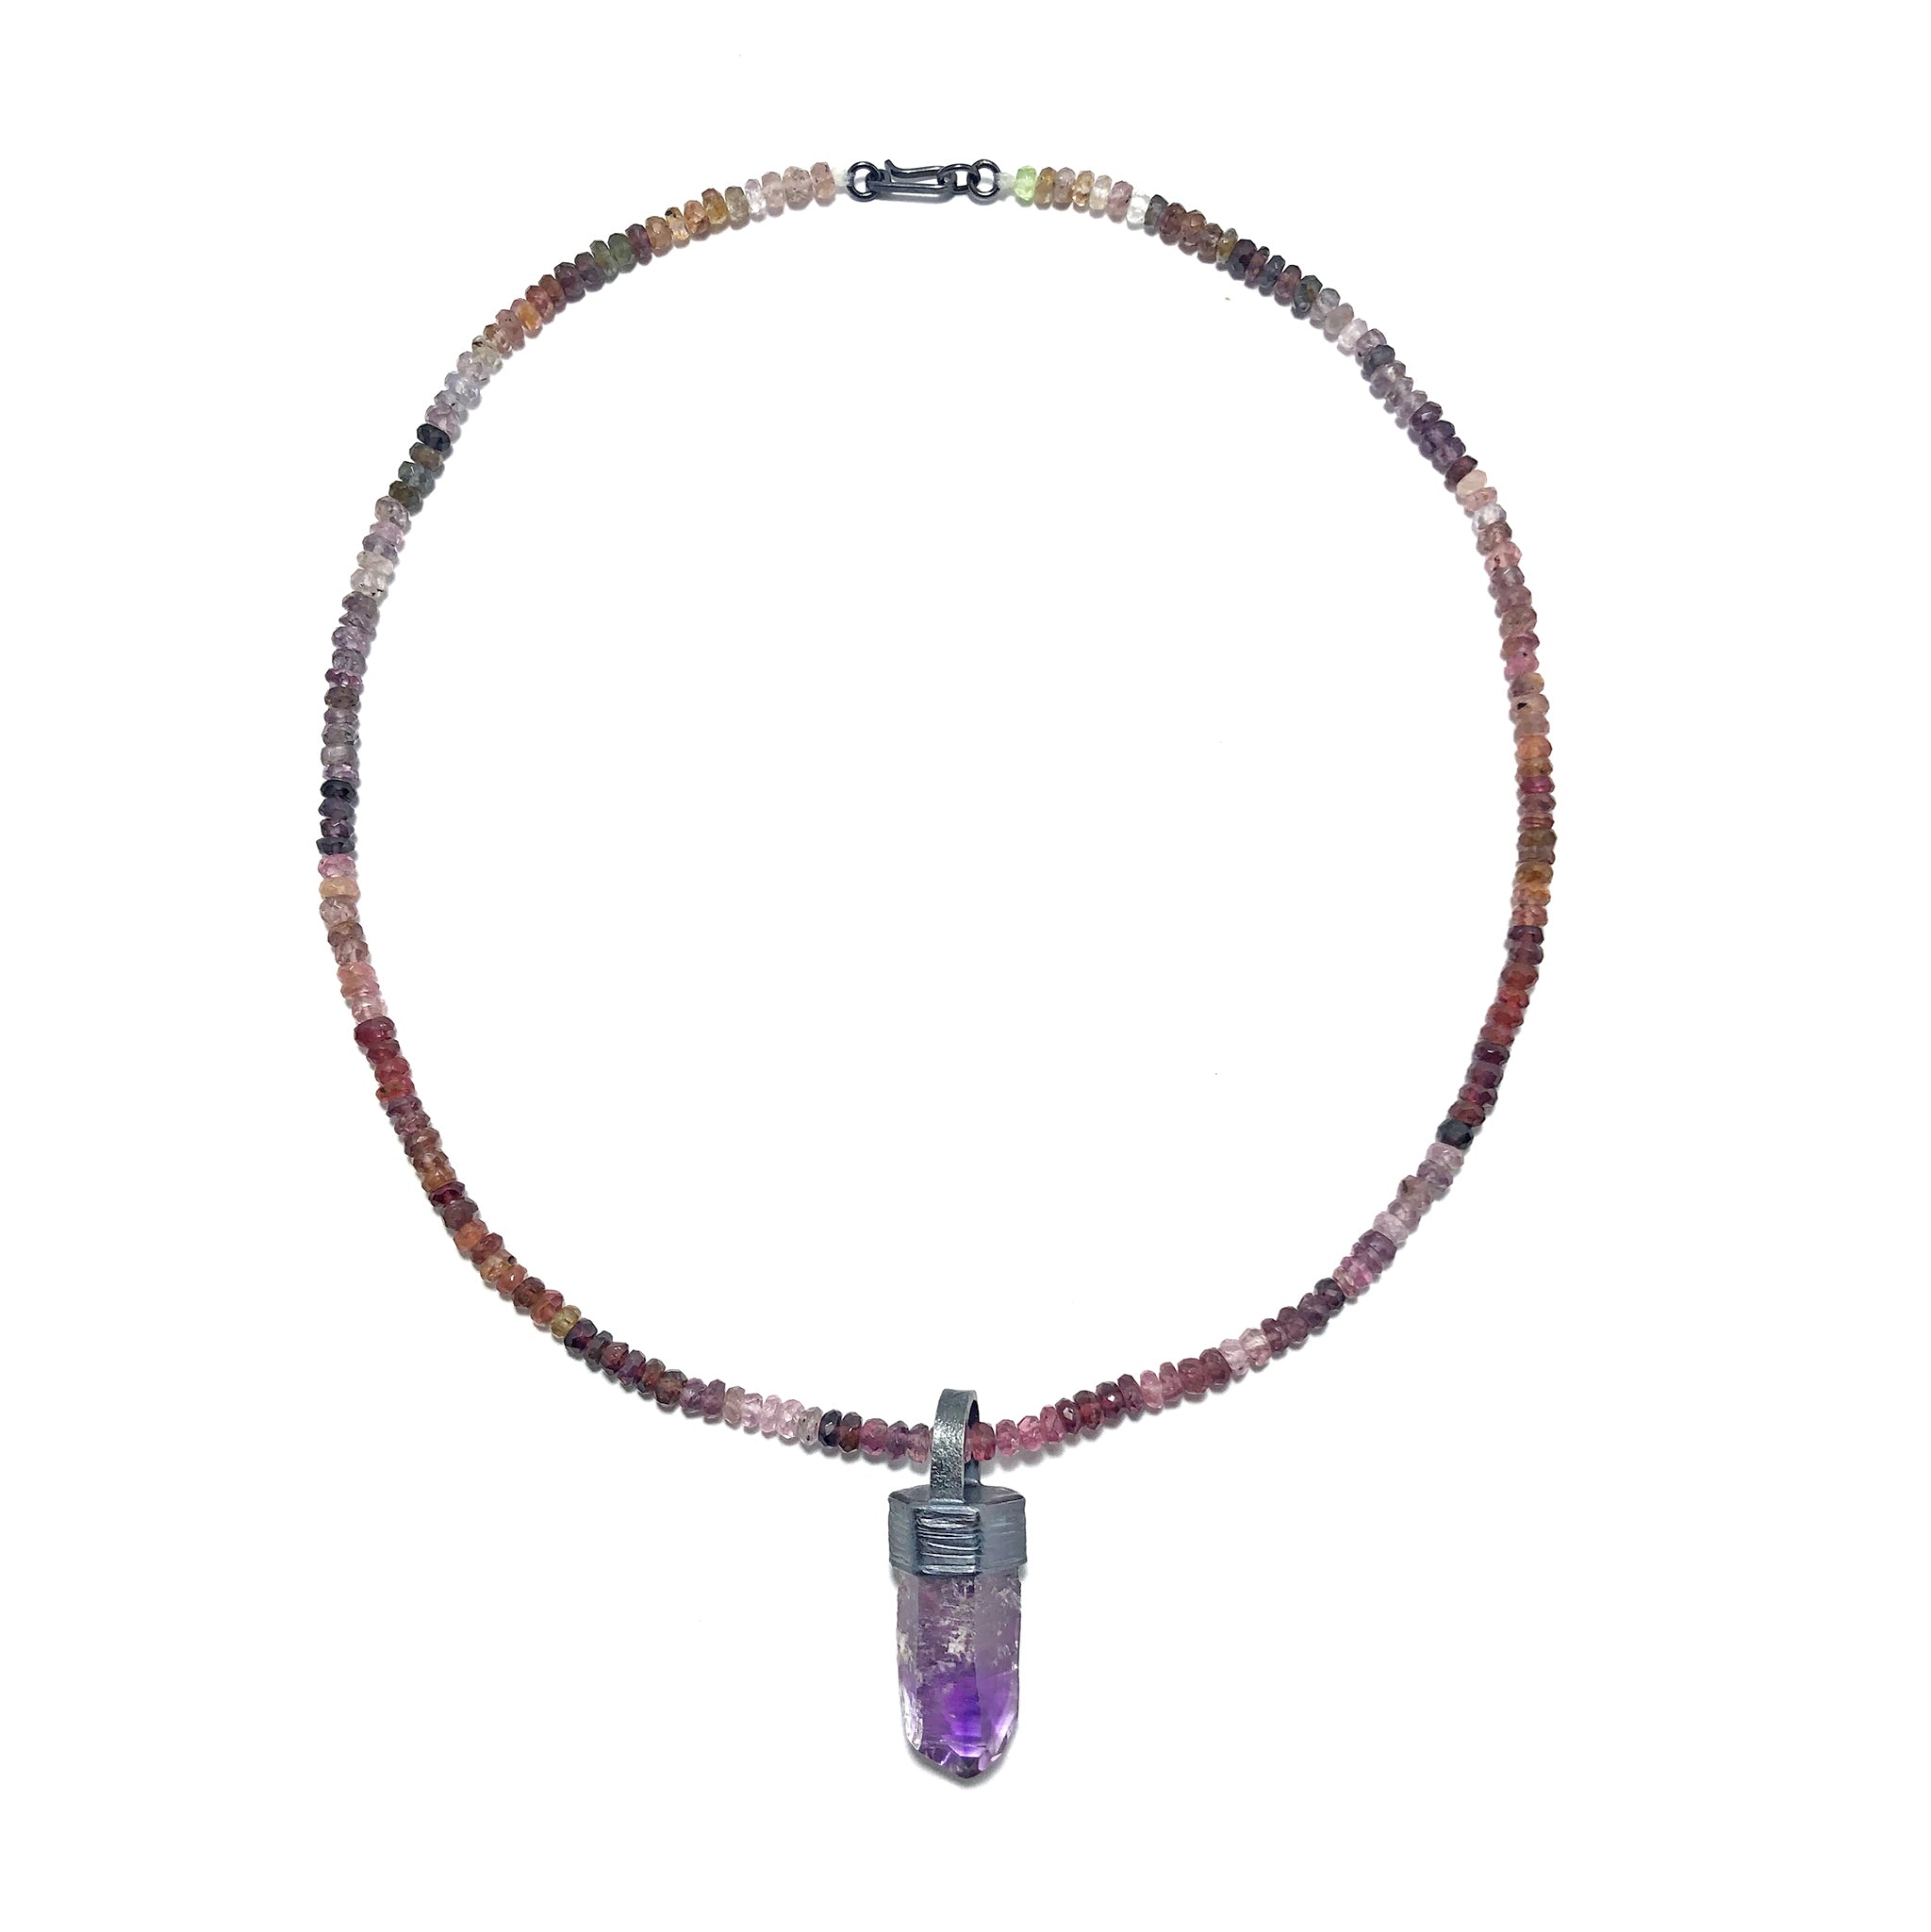 Amethyst Crystal Pendant with Spinel Beads. "Enamored Adornments" Collection by Alex Lozier Jewelry.